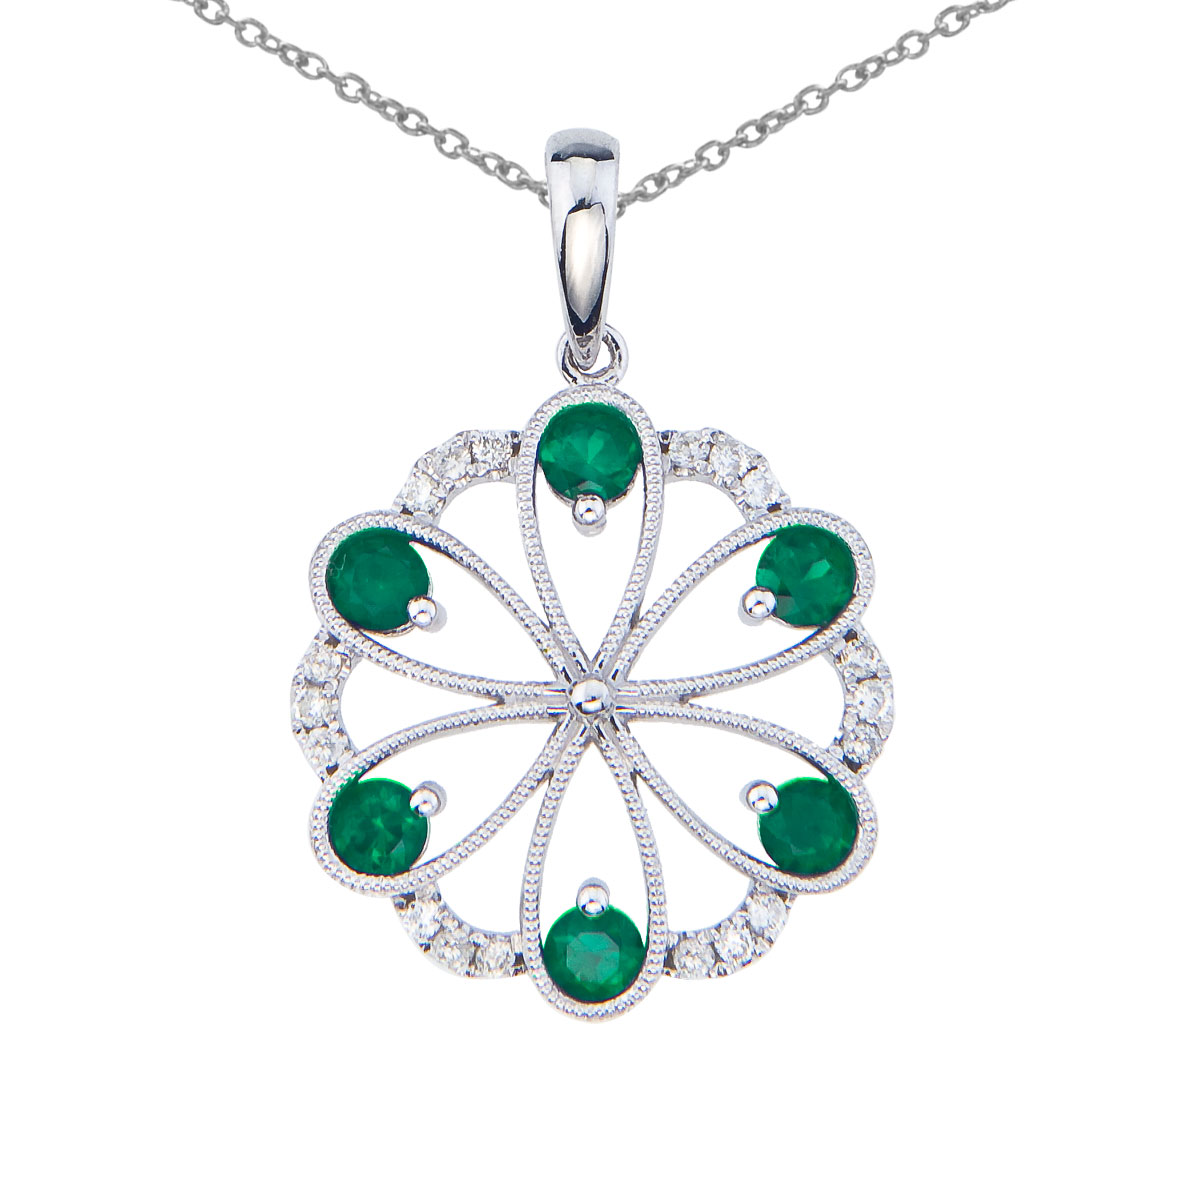 JCX2560: Beautiful floral pendant set in 14k white gold with 6 dazzling emeralds and .14 total carats of bright diamonds.